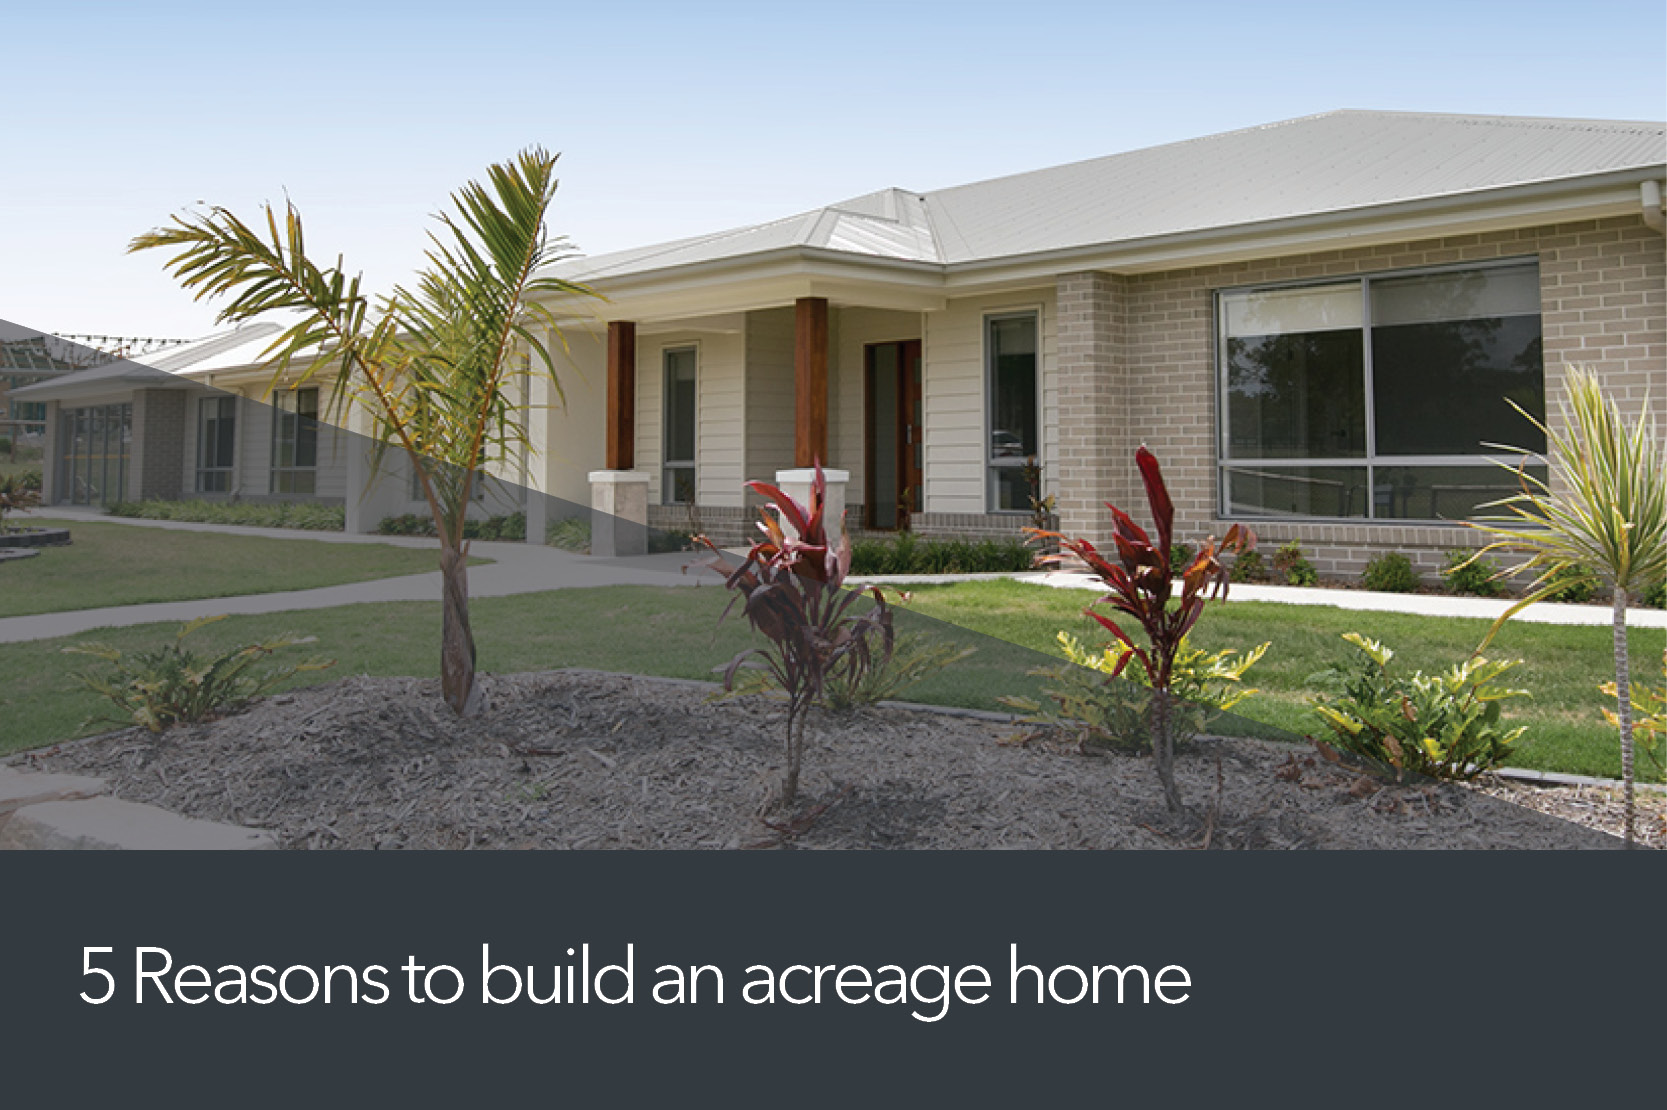 5 Reasons to Build an Acreage Home